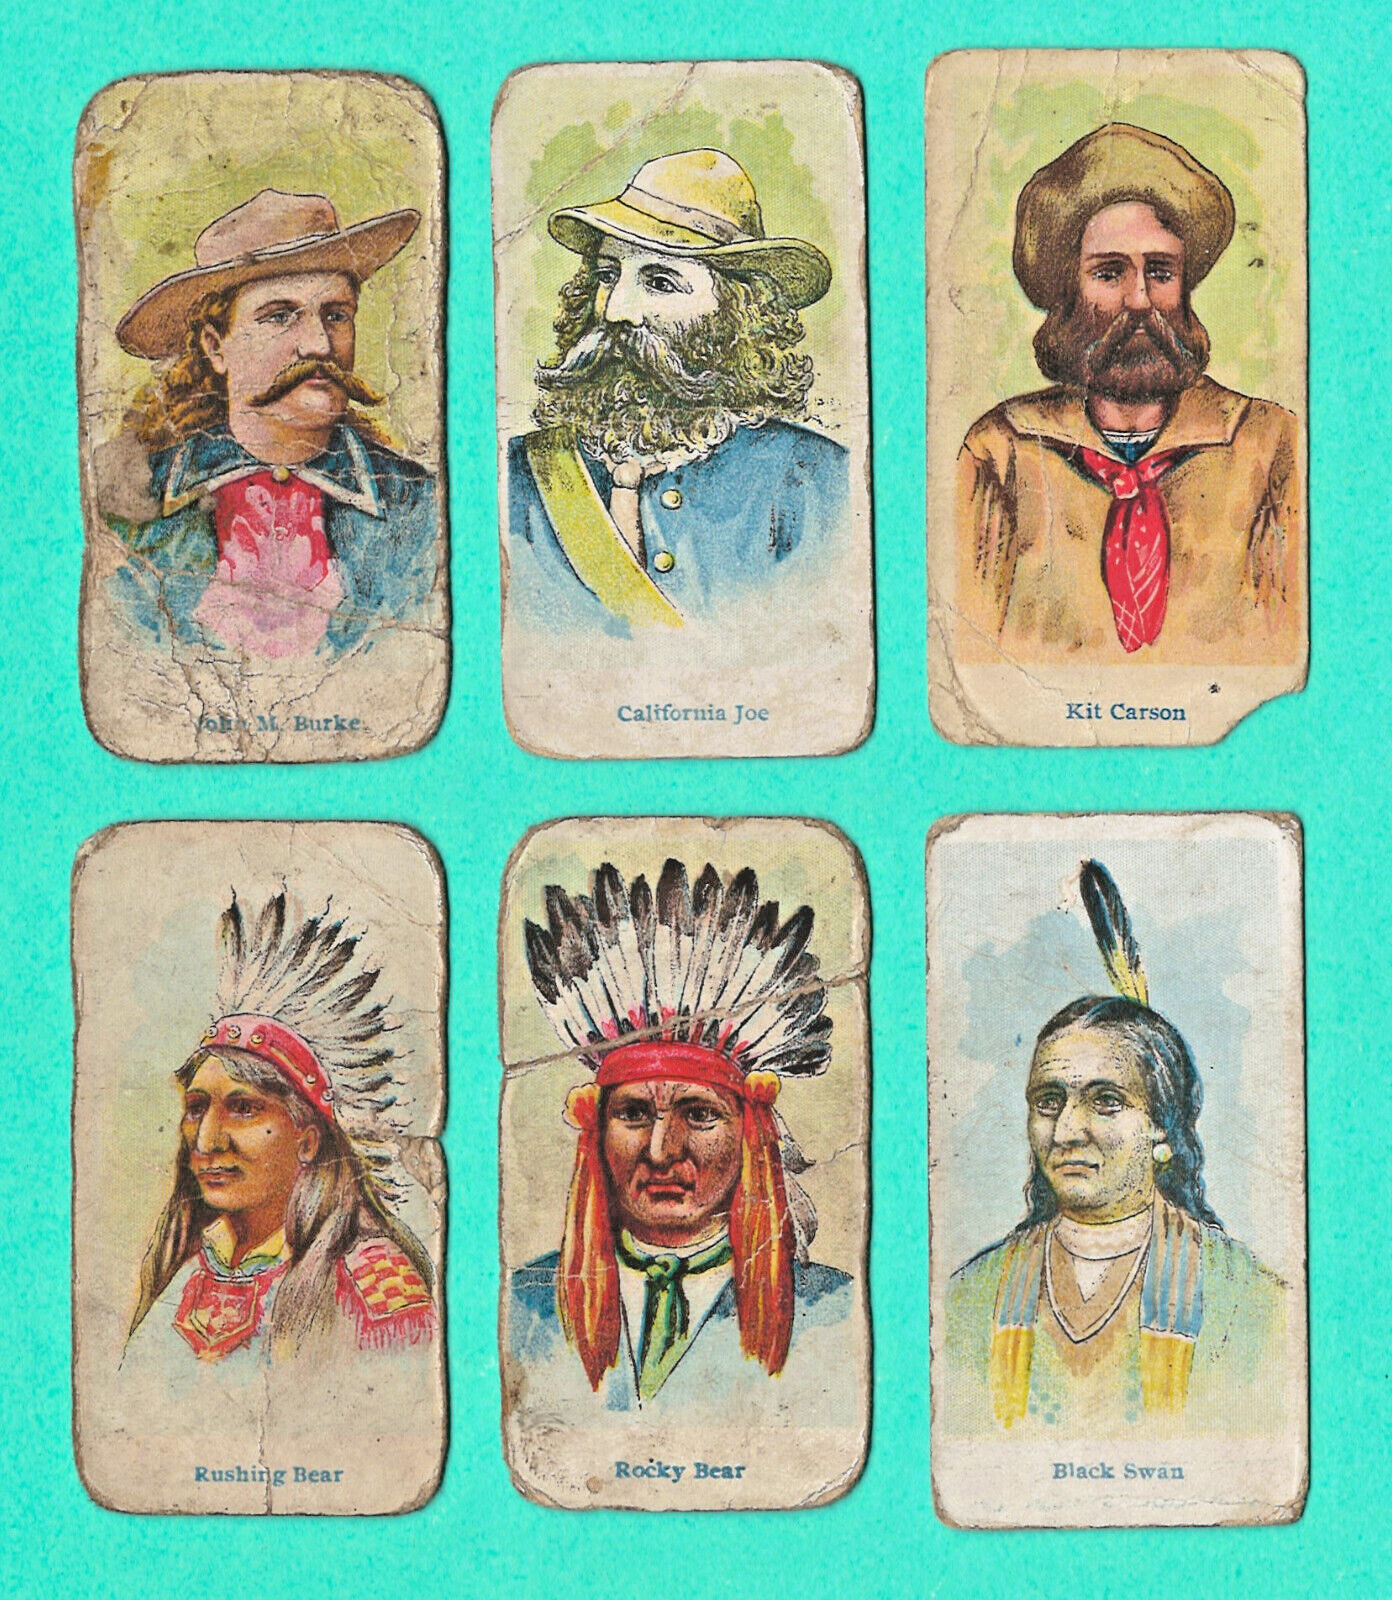 1910 E49 AMERICAN CARAMEL Lot of 6 Wild West Caramels - KIT CARSON